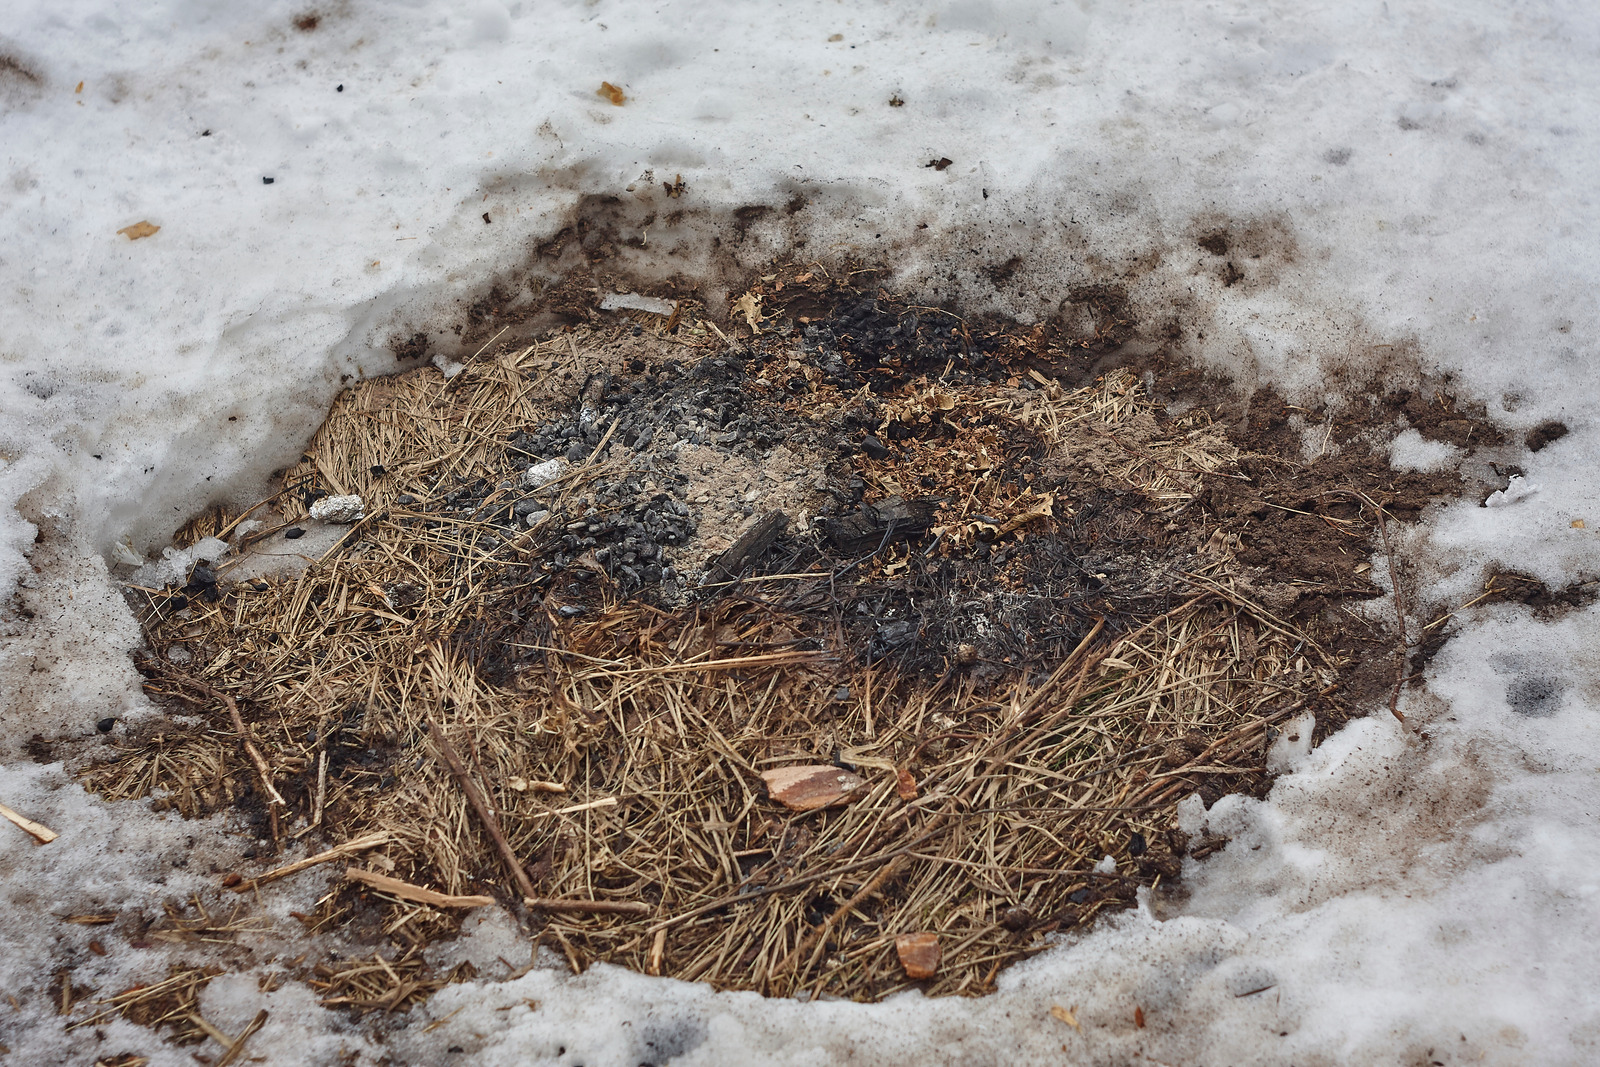 bonfire site in snow. close up, white, ice, grass, coal, ashes, stick, branch, texture